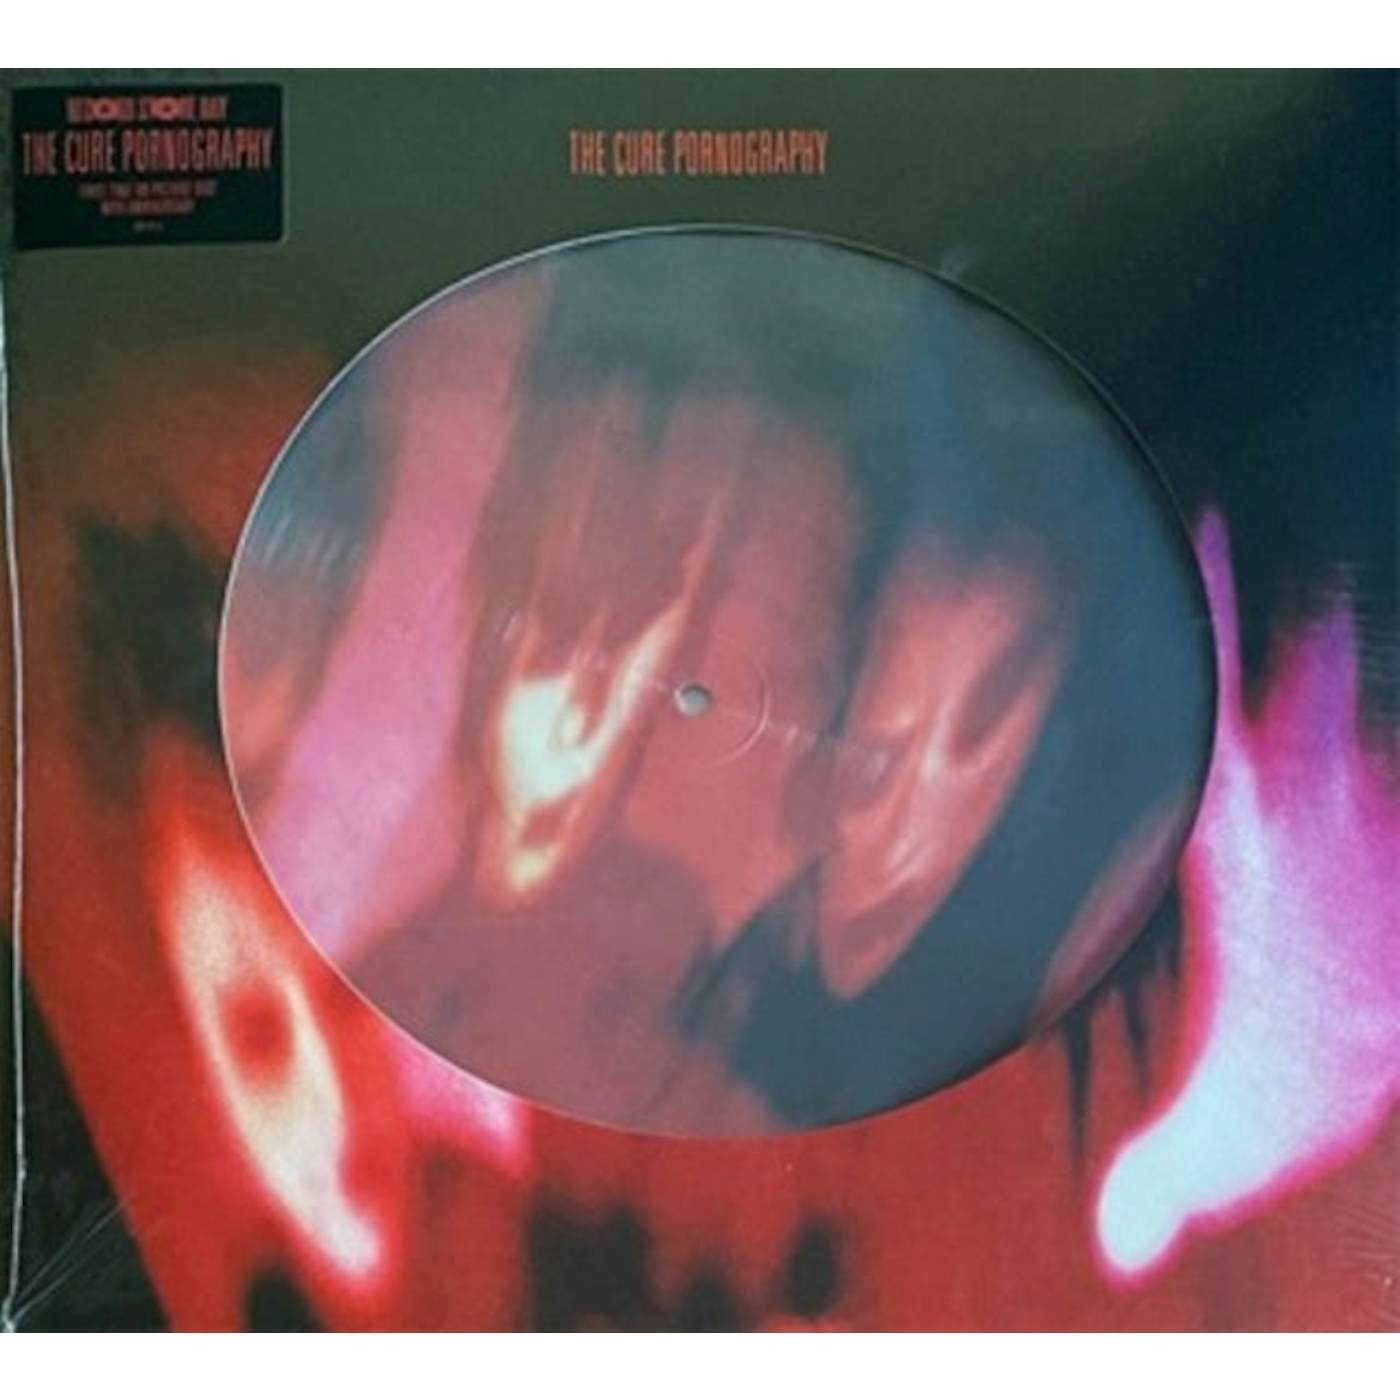 The Cure LP Vinyl Record - Pornography (Picture Disc) (Rsd 20. 22)